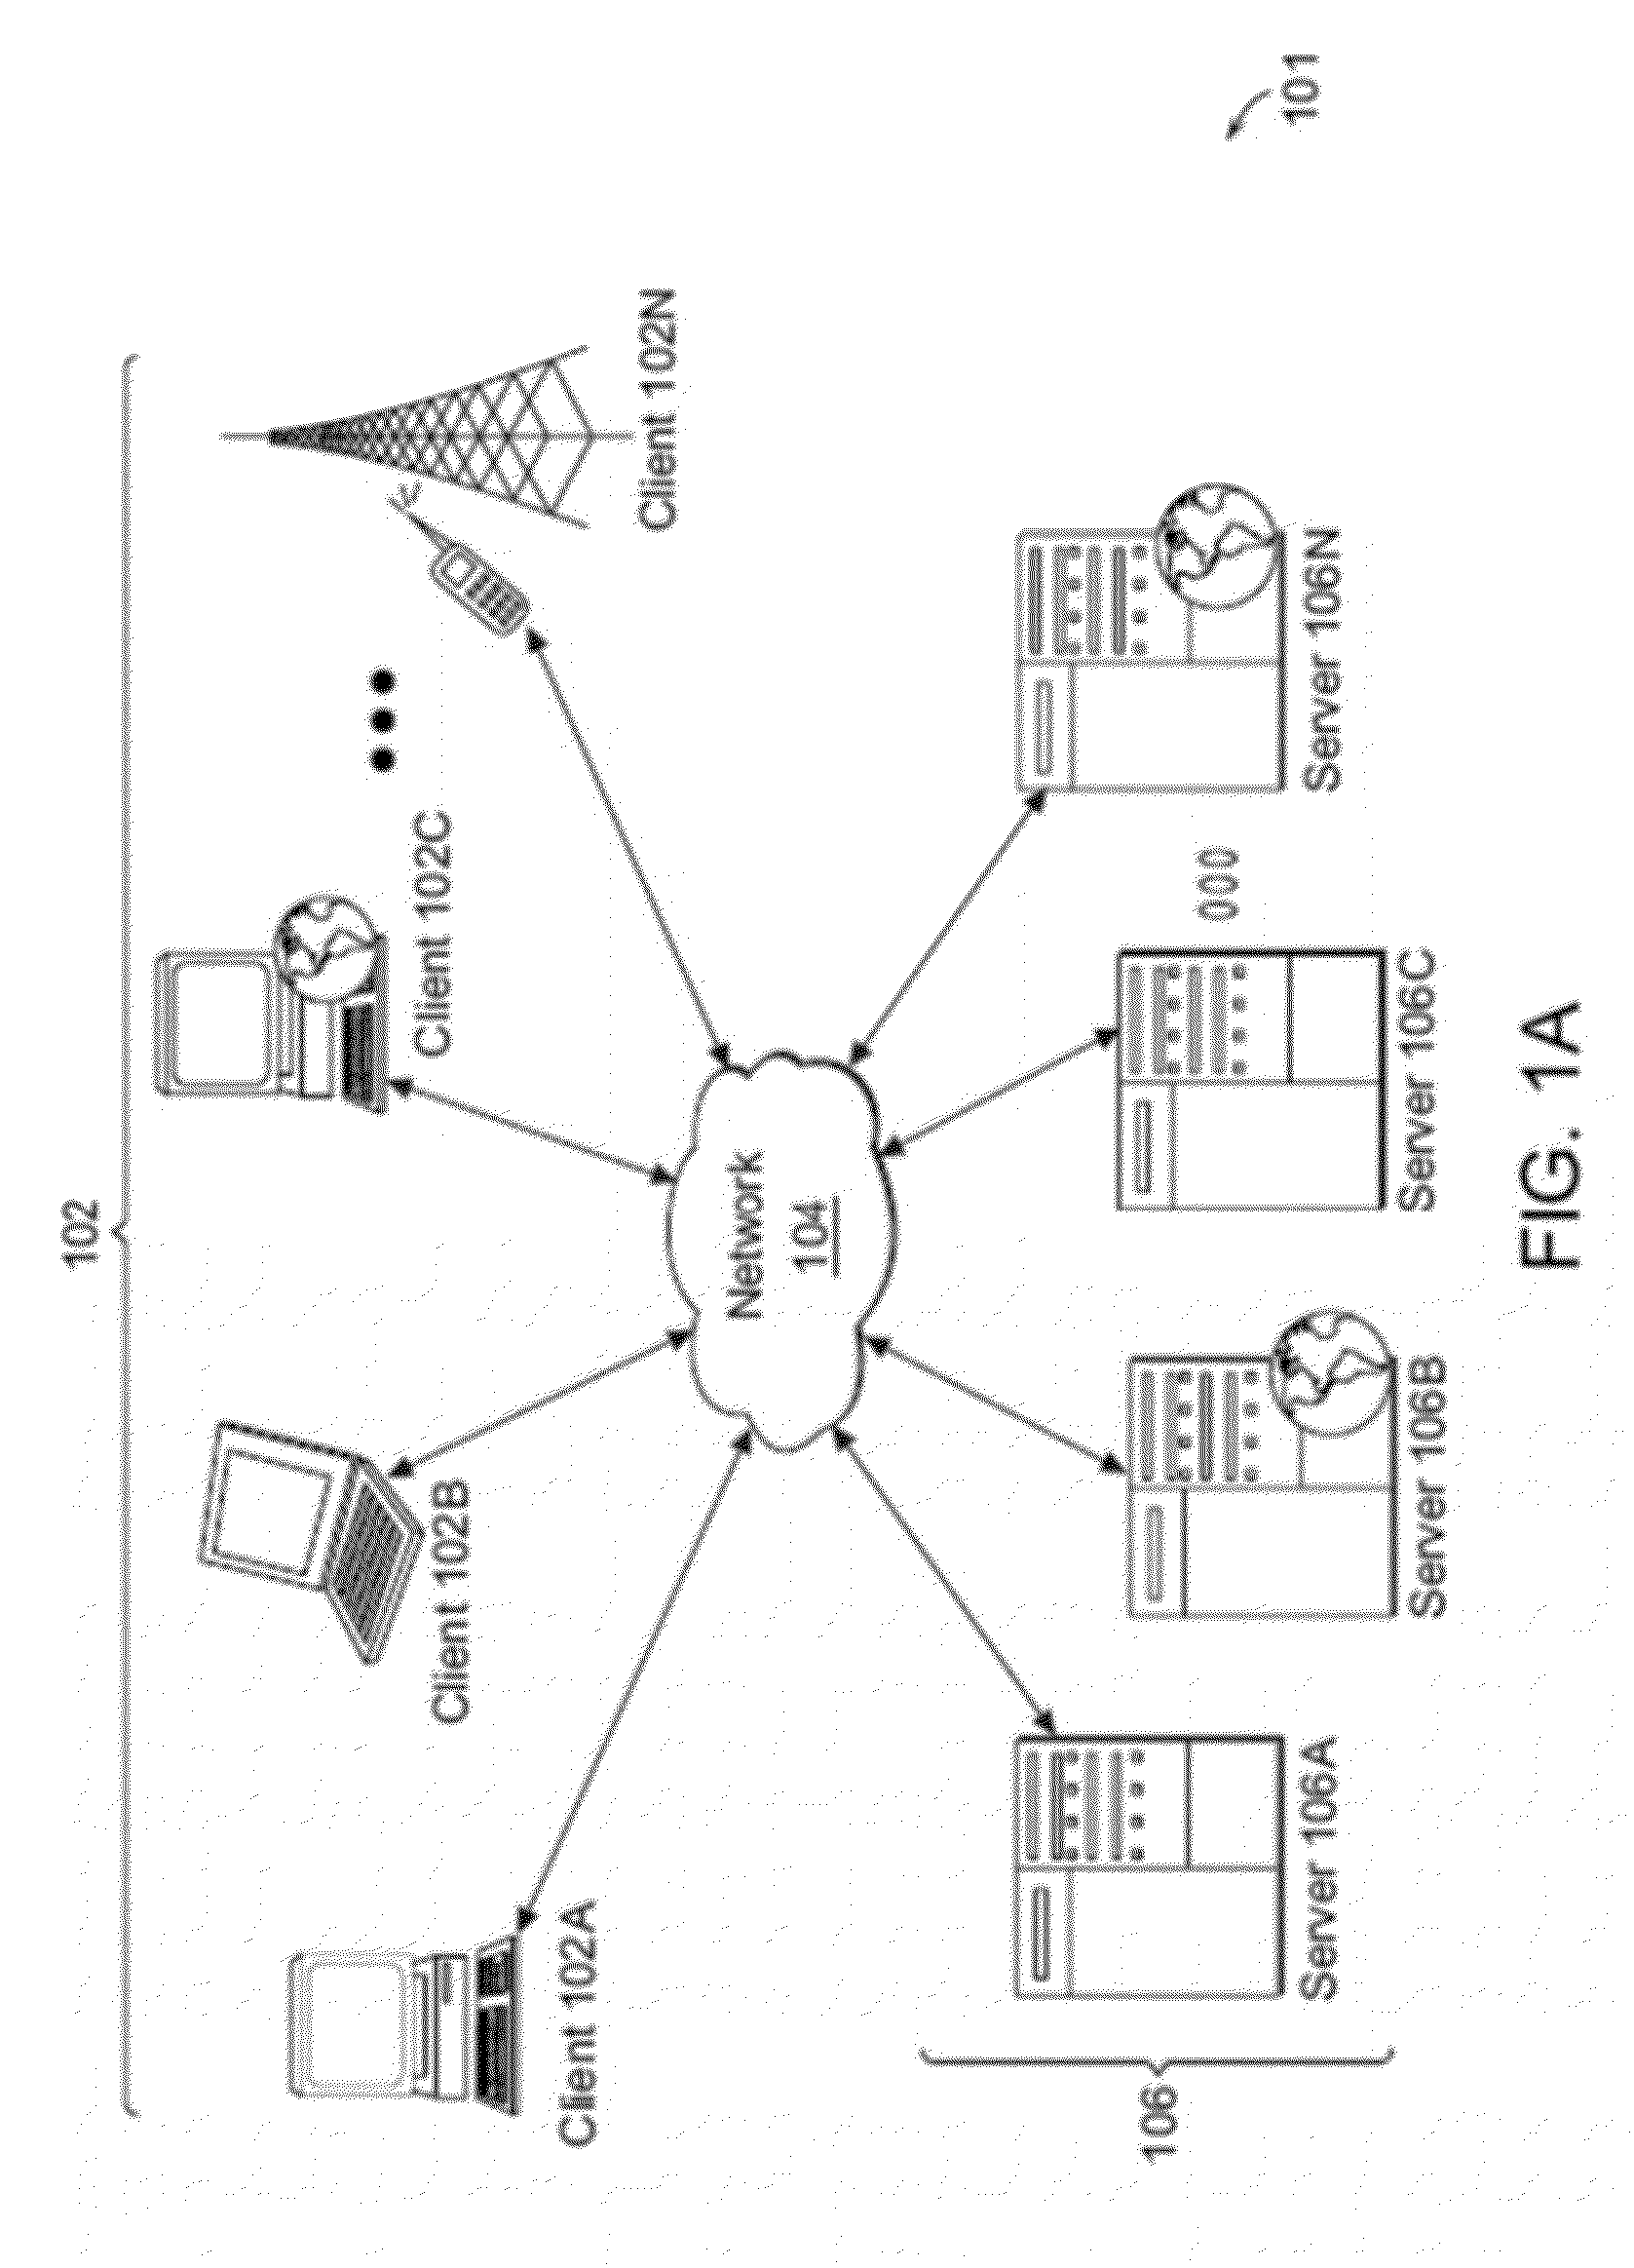 Methods and systems for virtualizing audio hardware for one or more virtual machines